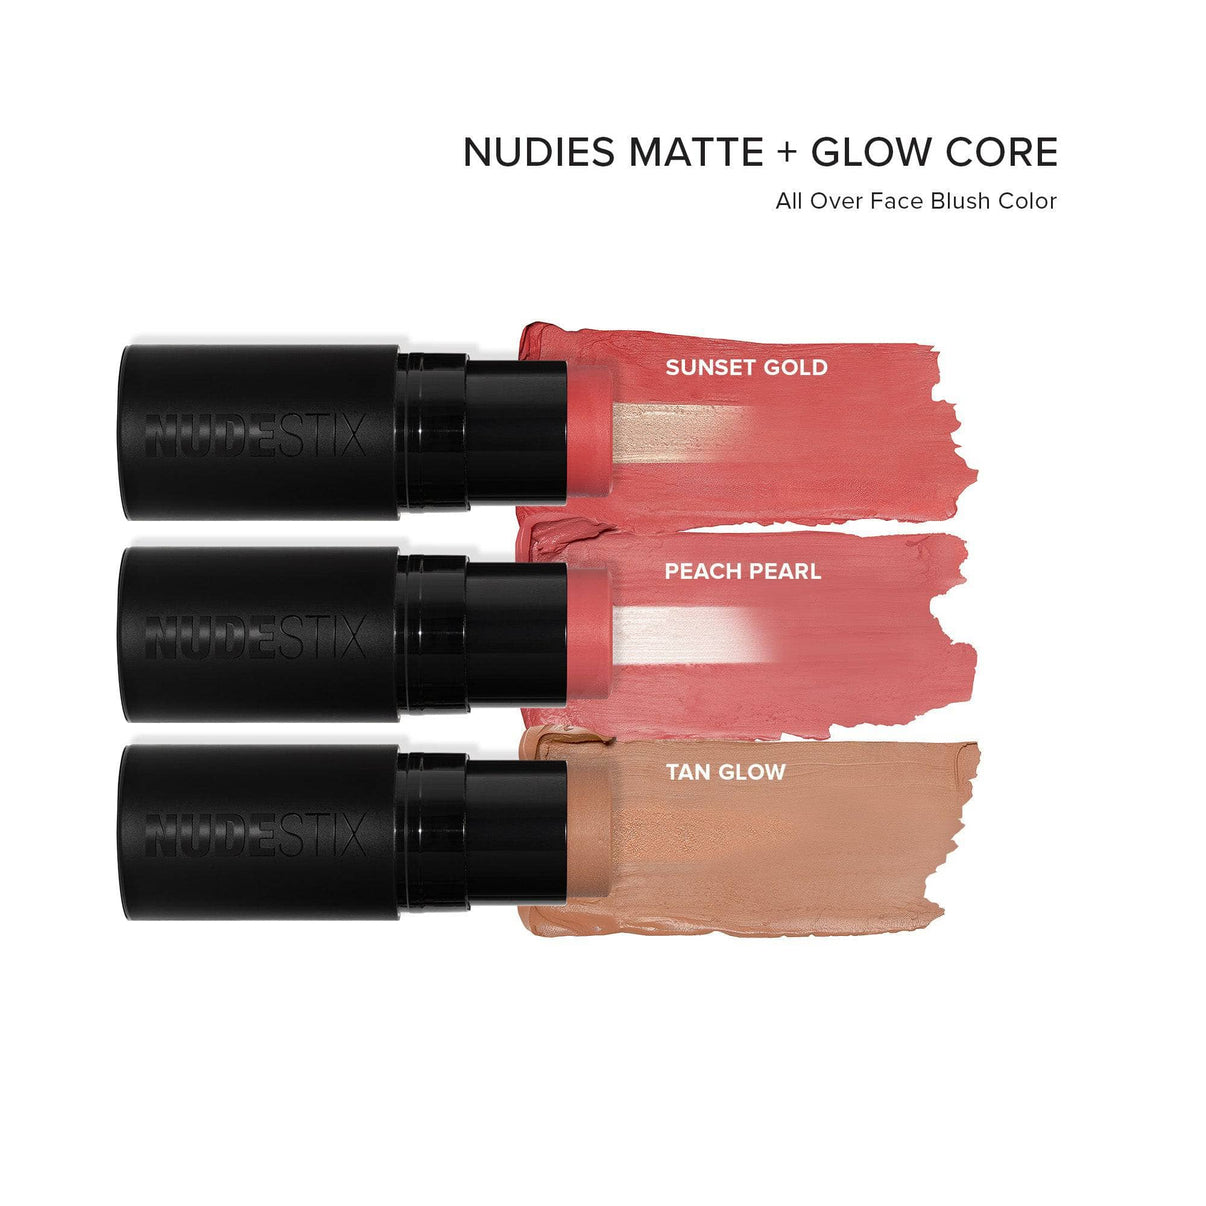 Warm Blush & Glow Core Kit with texture swatches